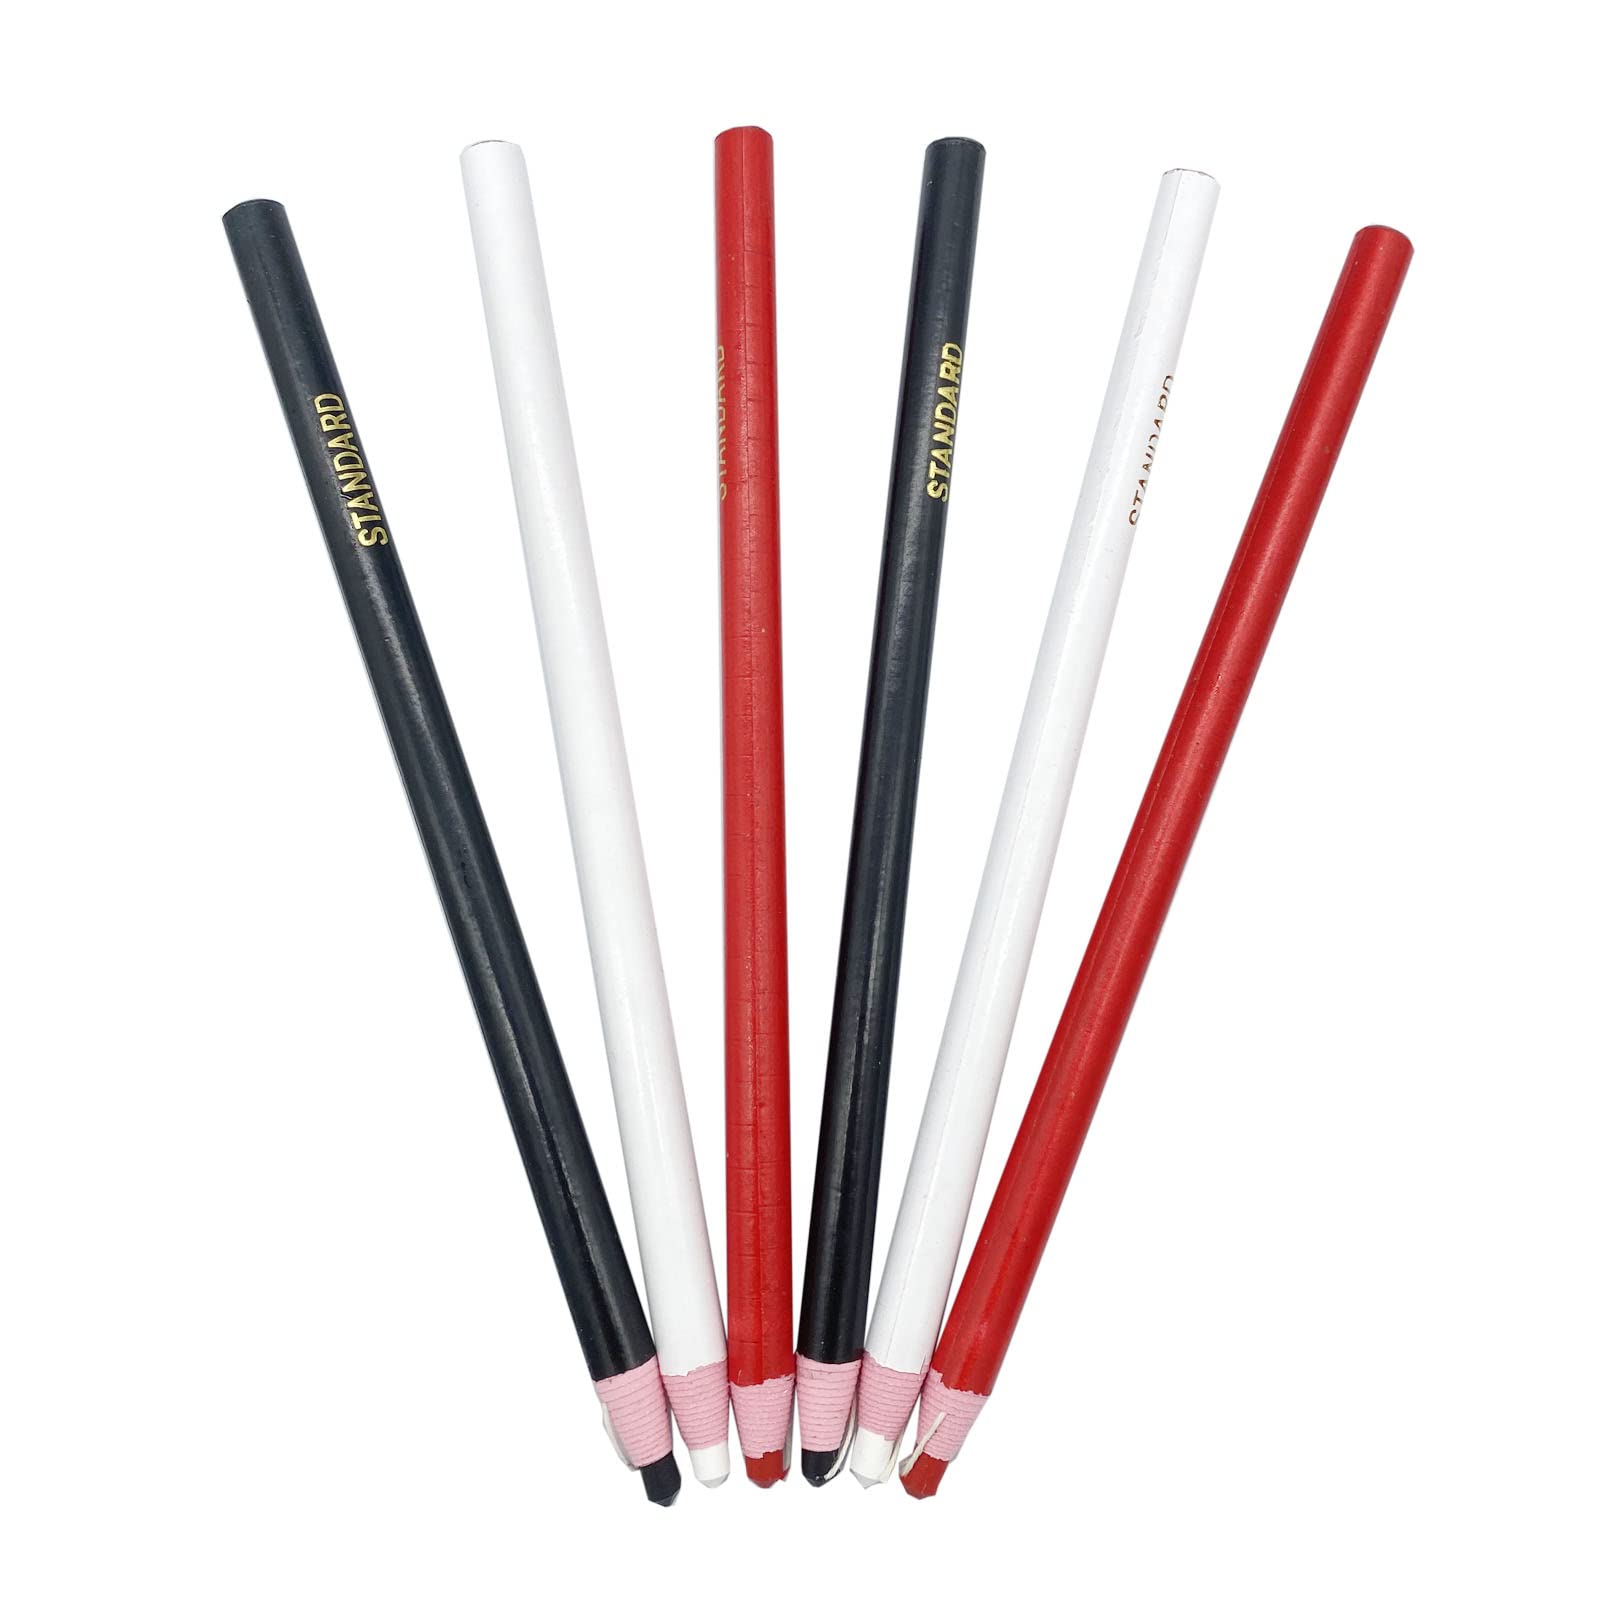  TEHAUX 6pcs Fabric Pencils for Sewing Cutting Sewing